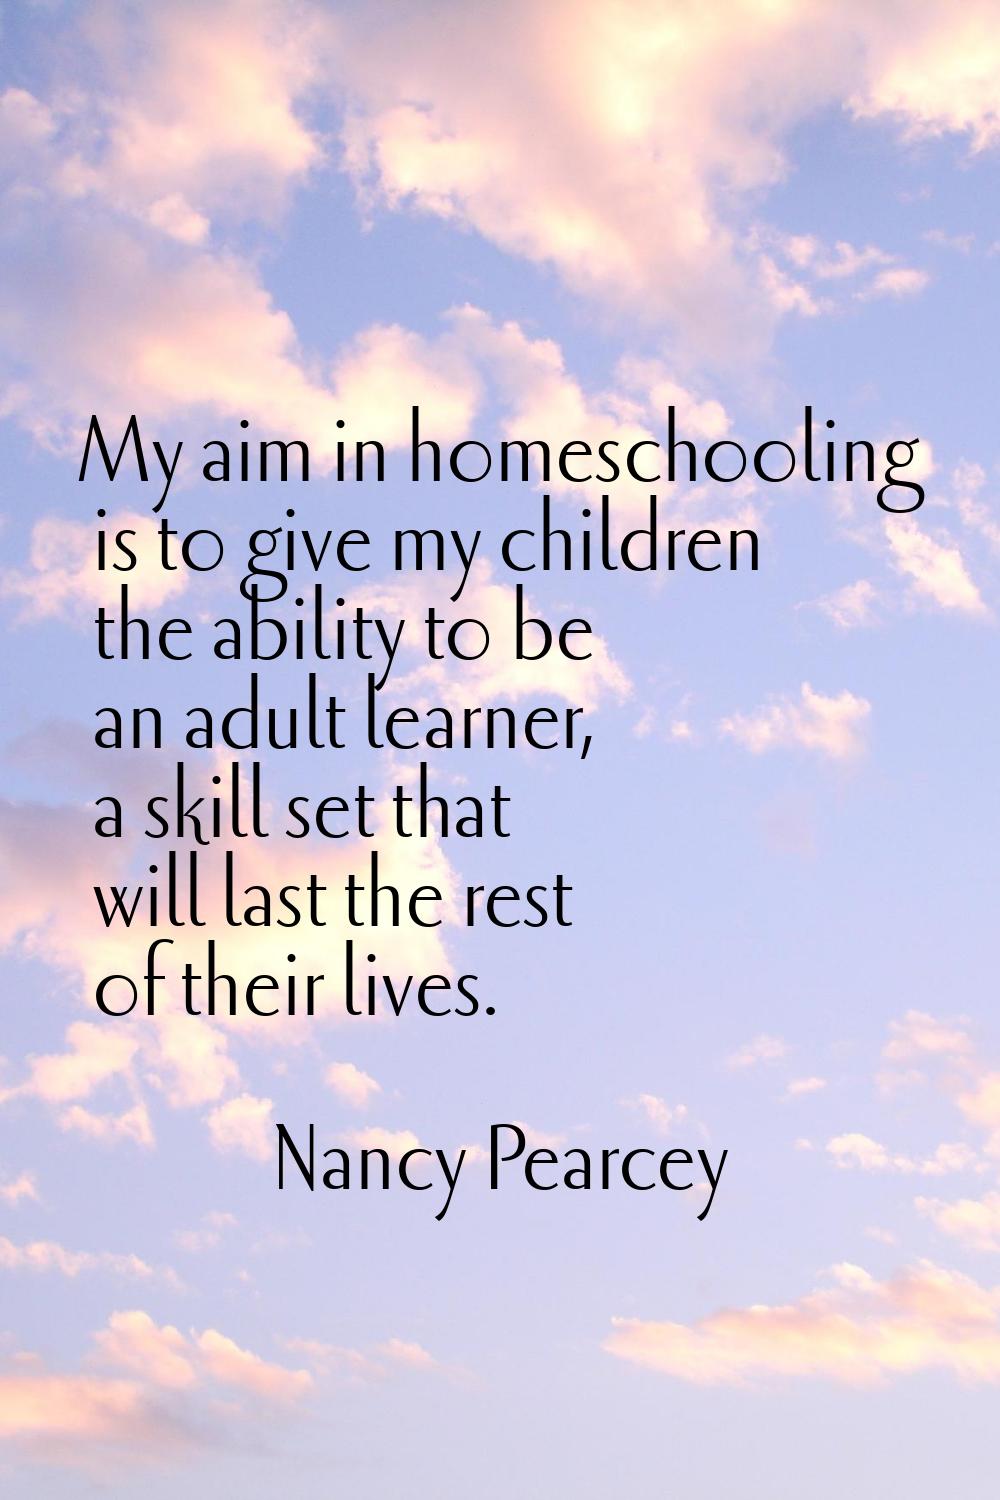 My aim in homeschooling is to give my children the ability to be an adult learner, a skill set that